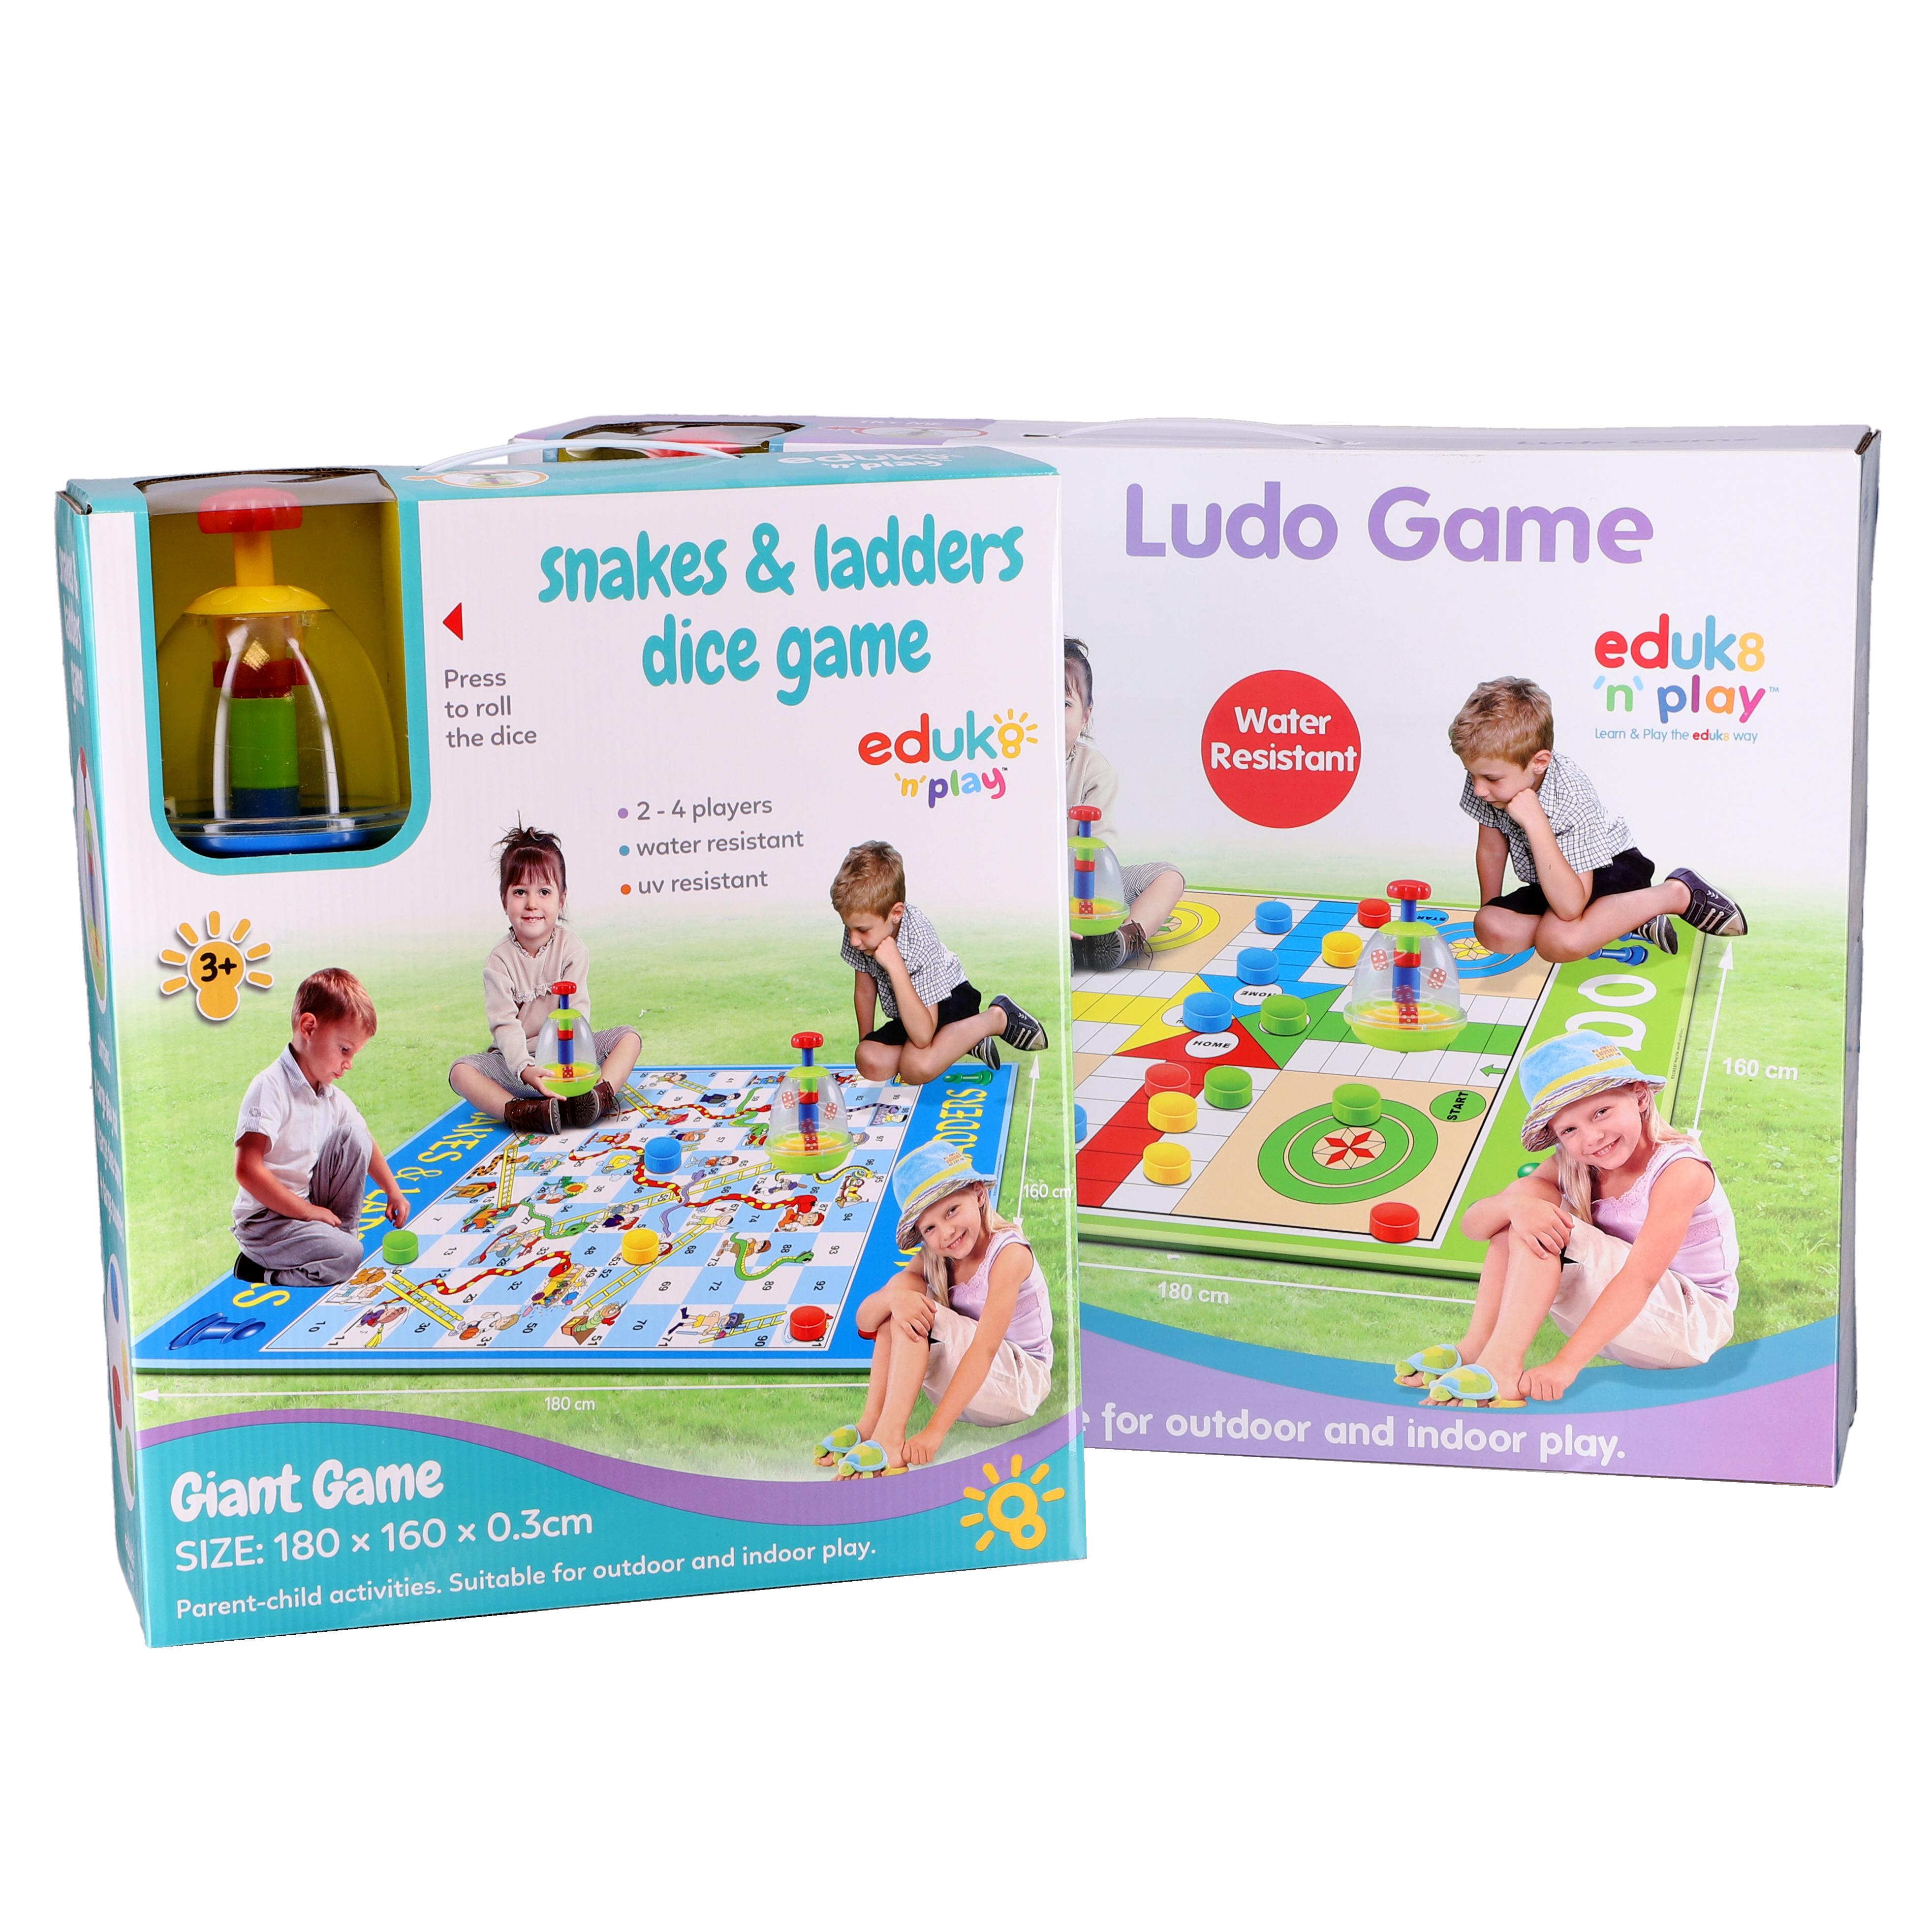 Large Dice Games Offer